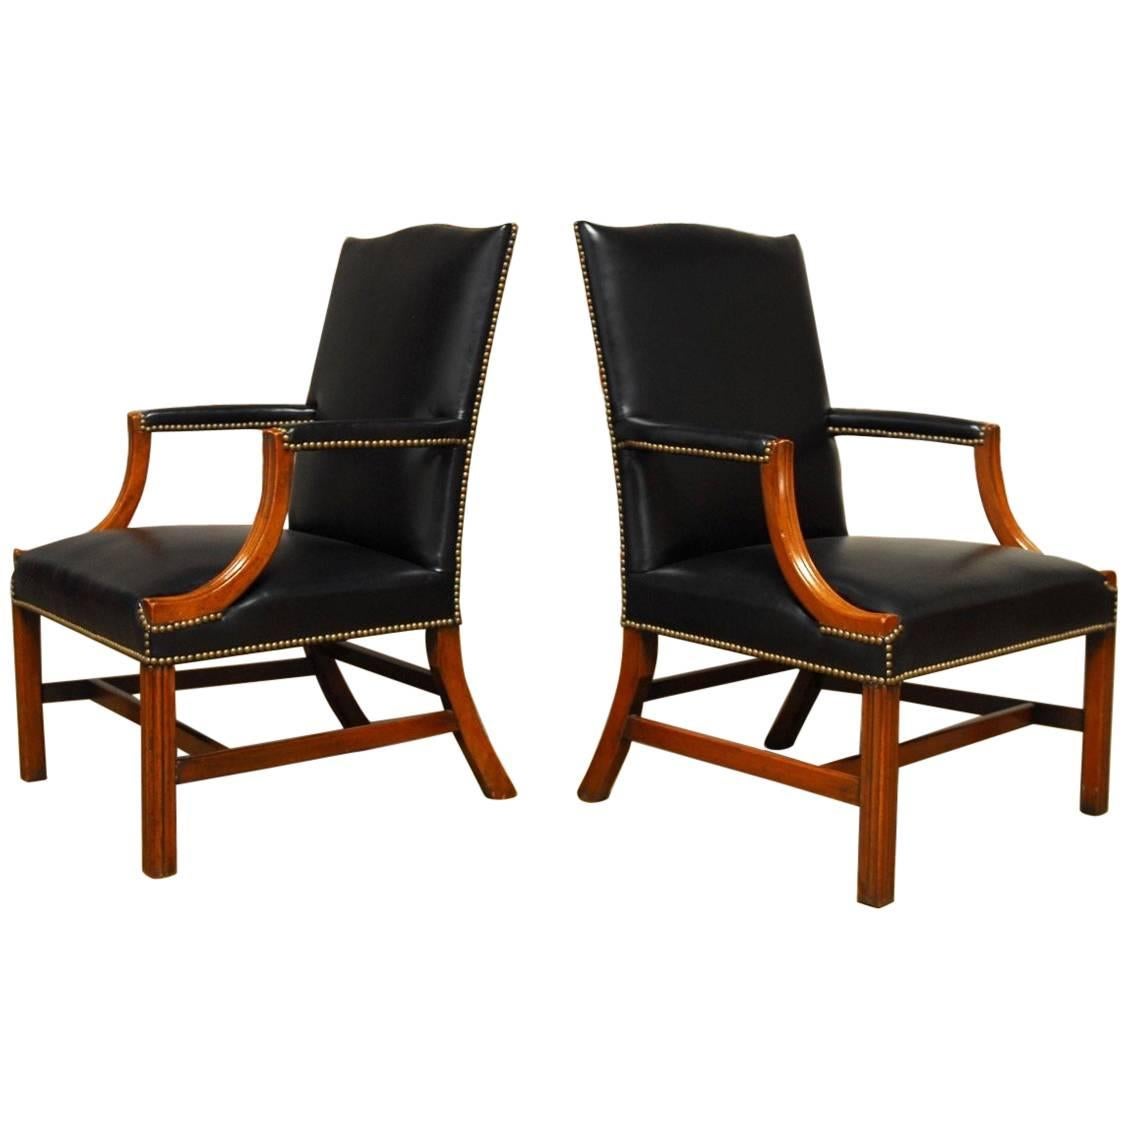 Famous Pair of Black Leather Mahogany Gainsborough Library Chairs